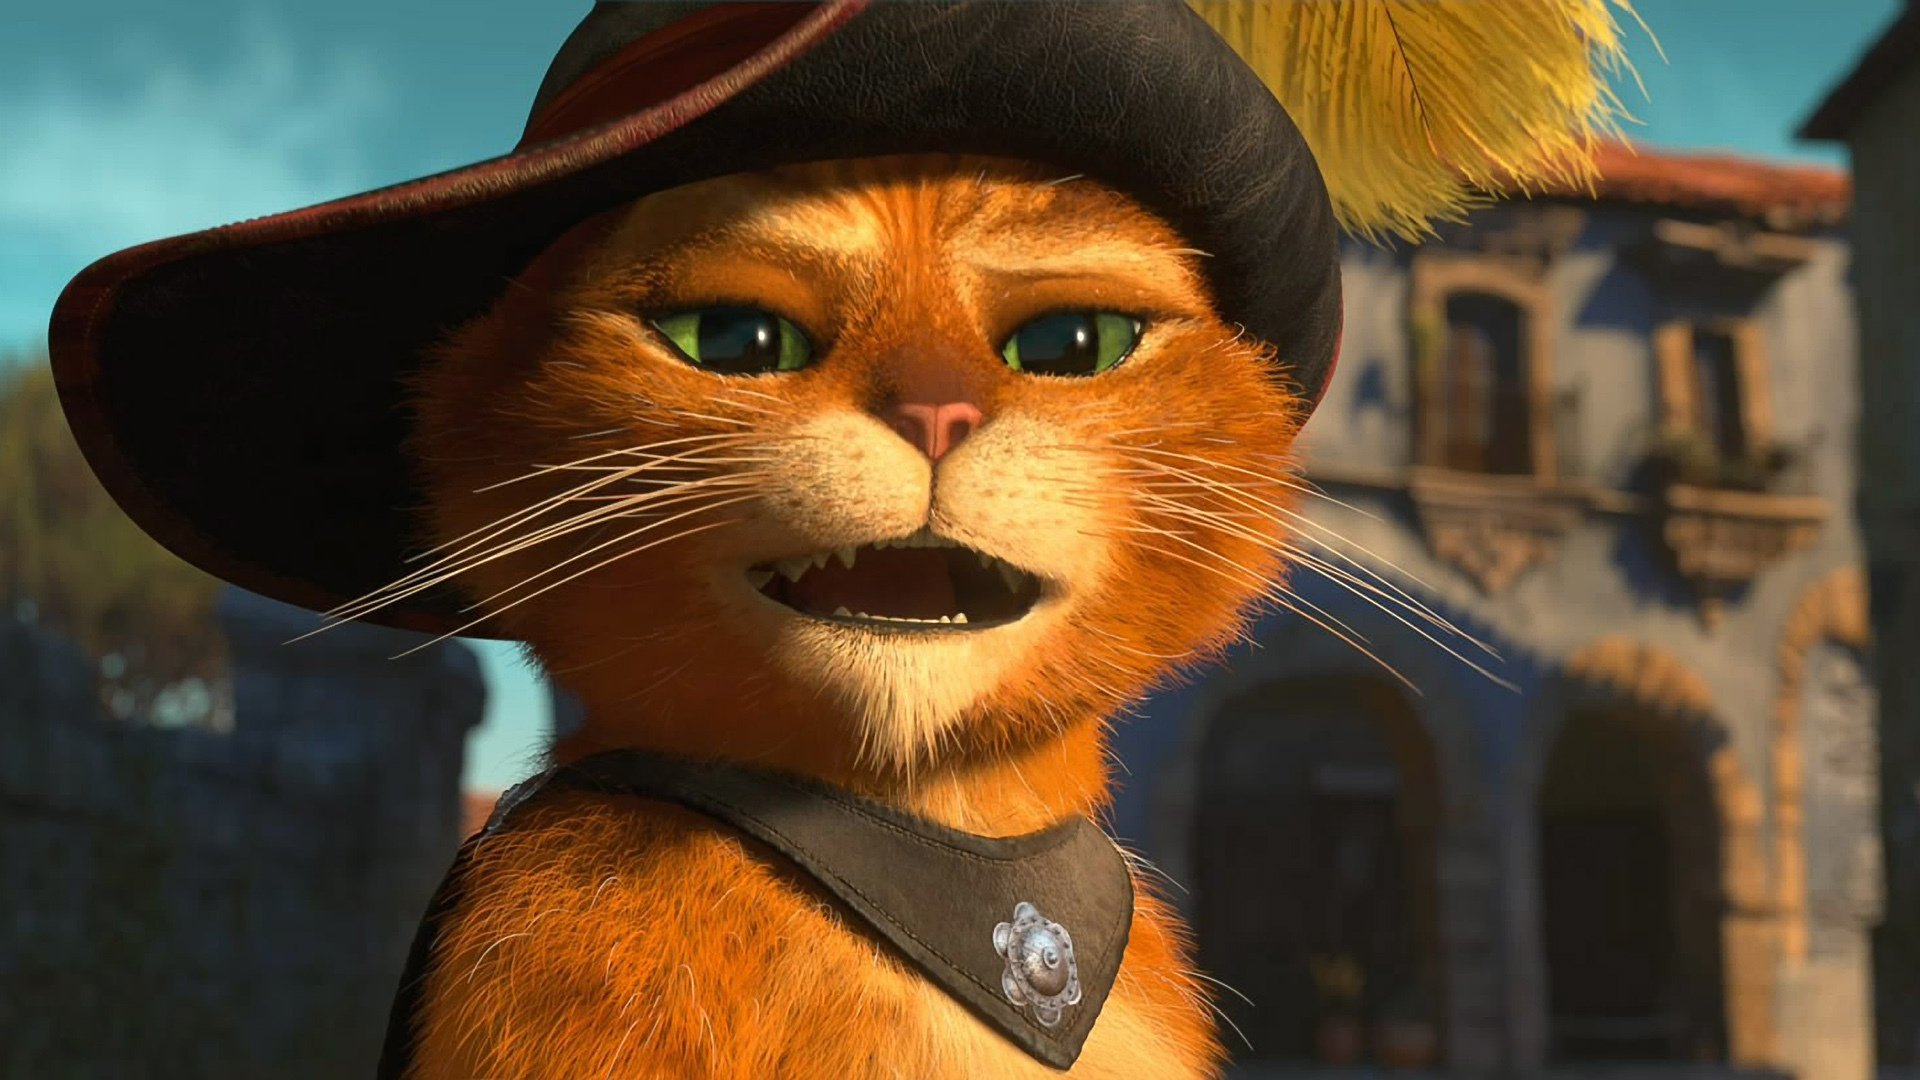 Puss in Boots Voiced By Antonio Banderas Full HD Wallpaper and